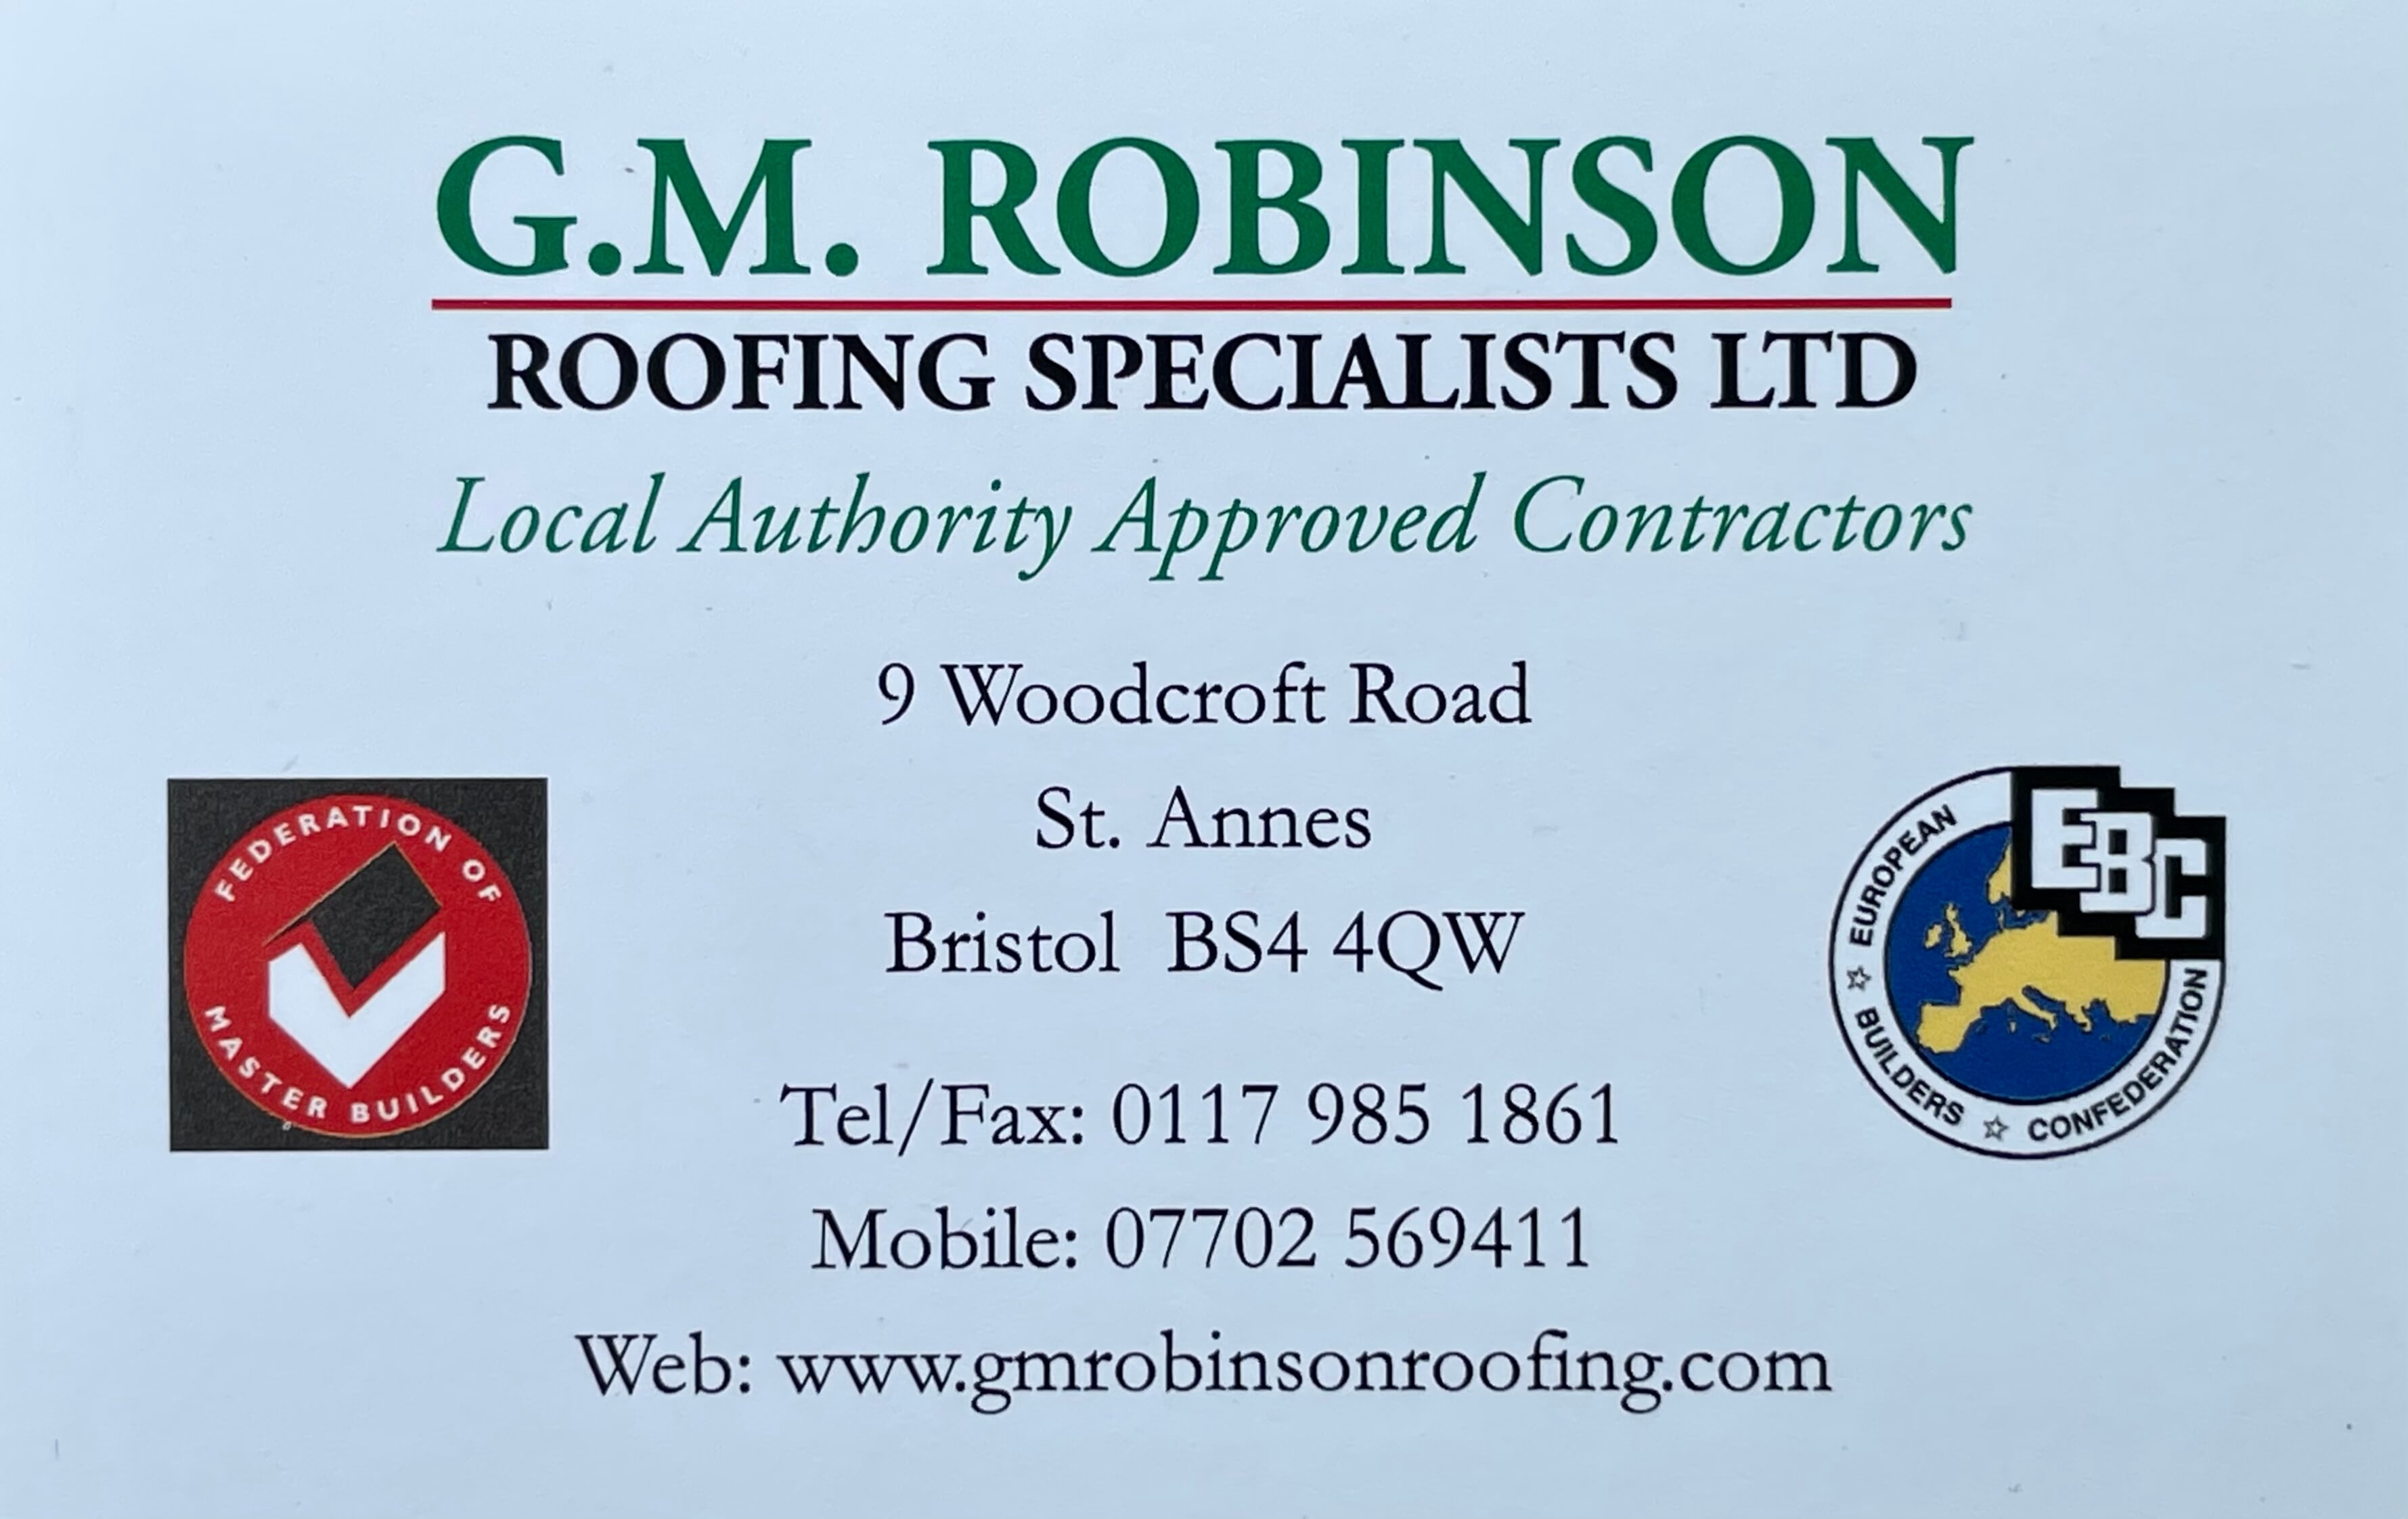 GM Robinson Roofing Specialists Ltd